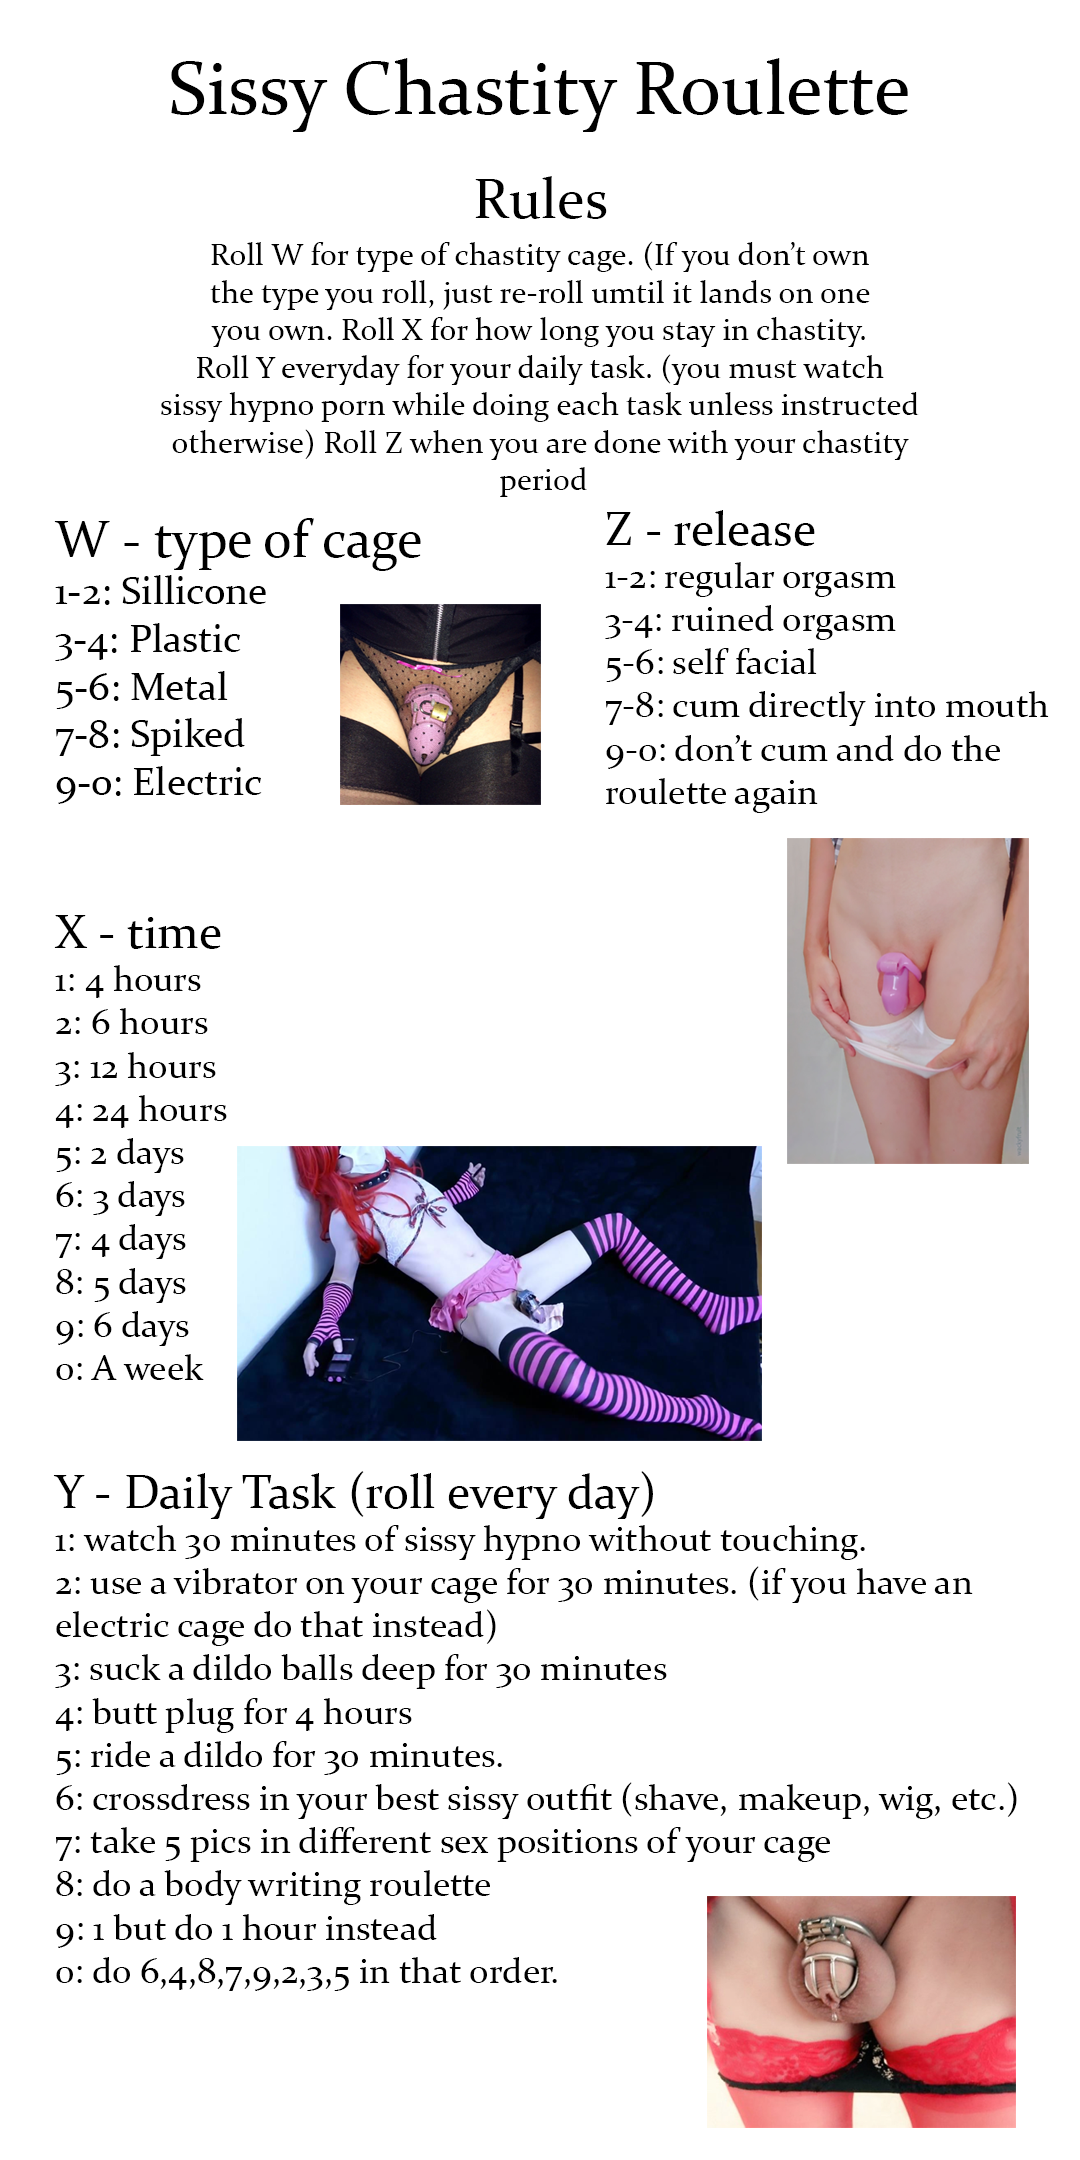 Sissy Chastity Roulette by CrystalAi. 